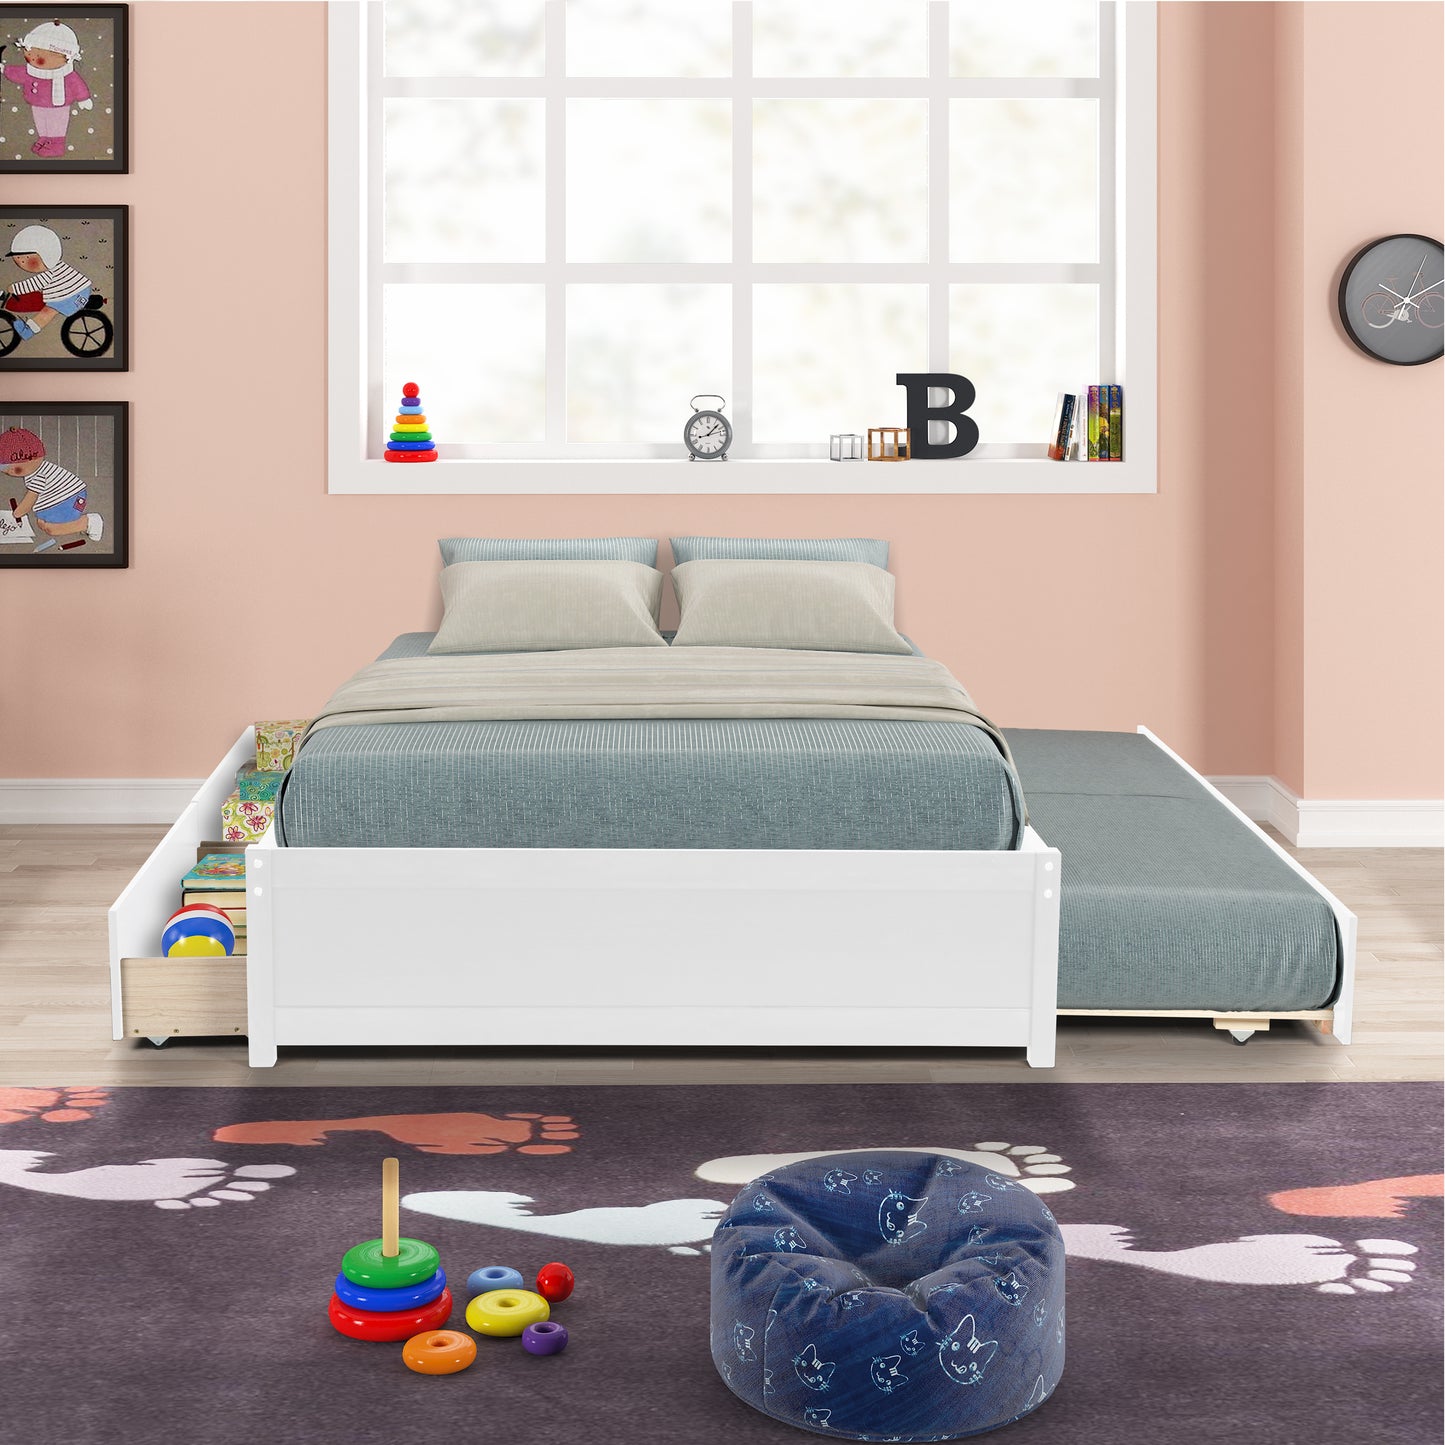 SYNGAR Bed Frame with Storage, Full Platform Bed with Trundle and 2 Storage Drawers for Kids Teens Adult, Espresso, LJ2561